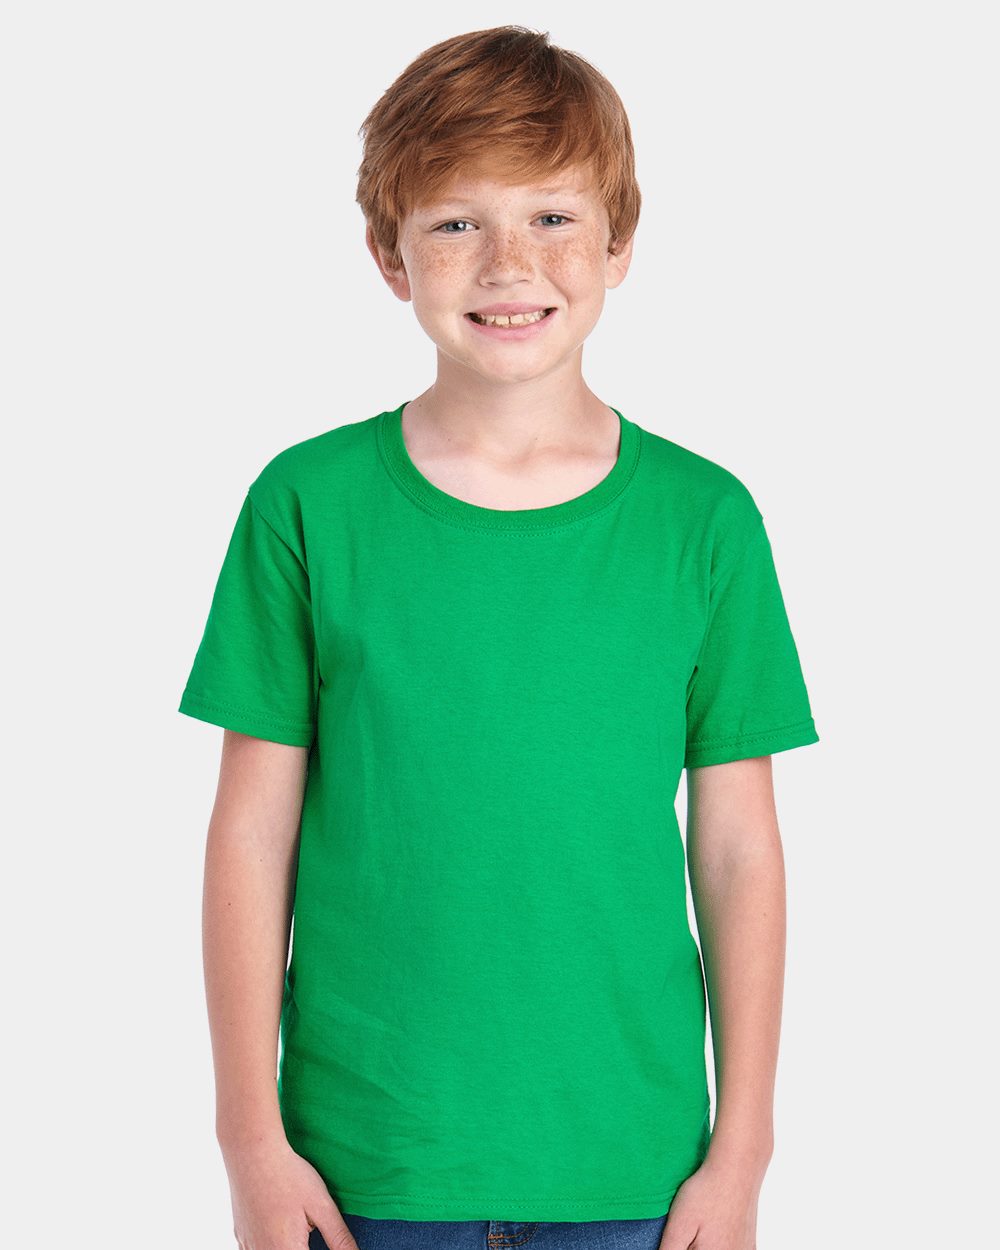 Fruit Of The Loom CHILDREN'S PERFORMANCE T-SHIRT WICKING SPORT FOOTBALL PE SIZES 